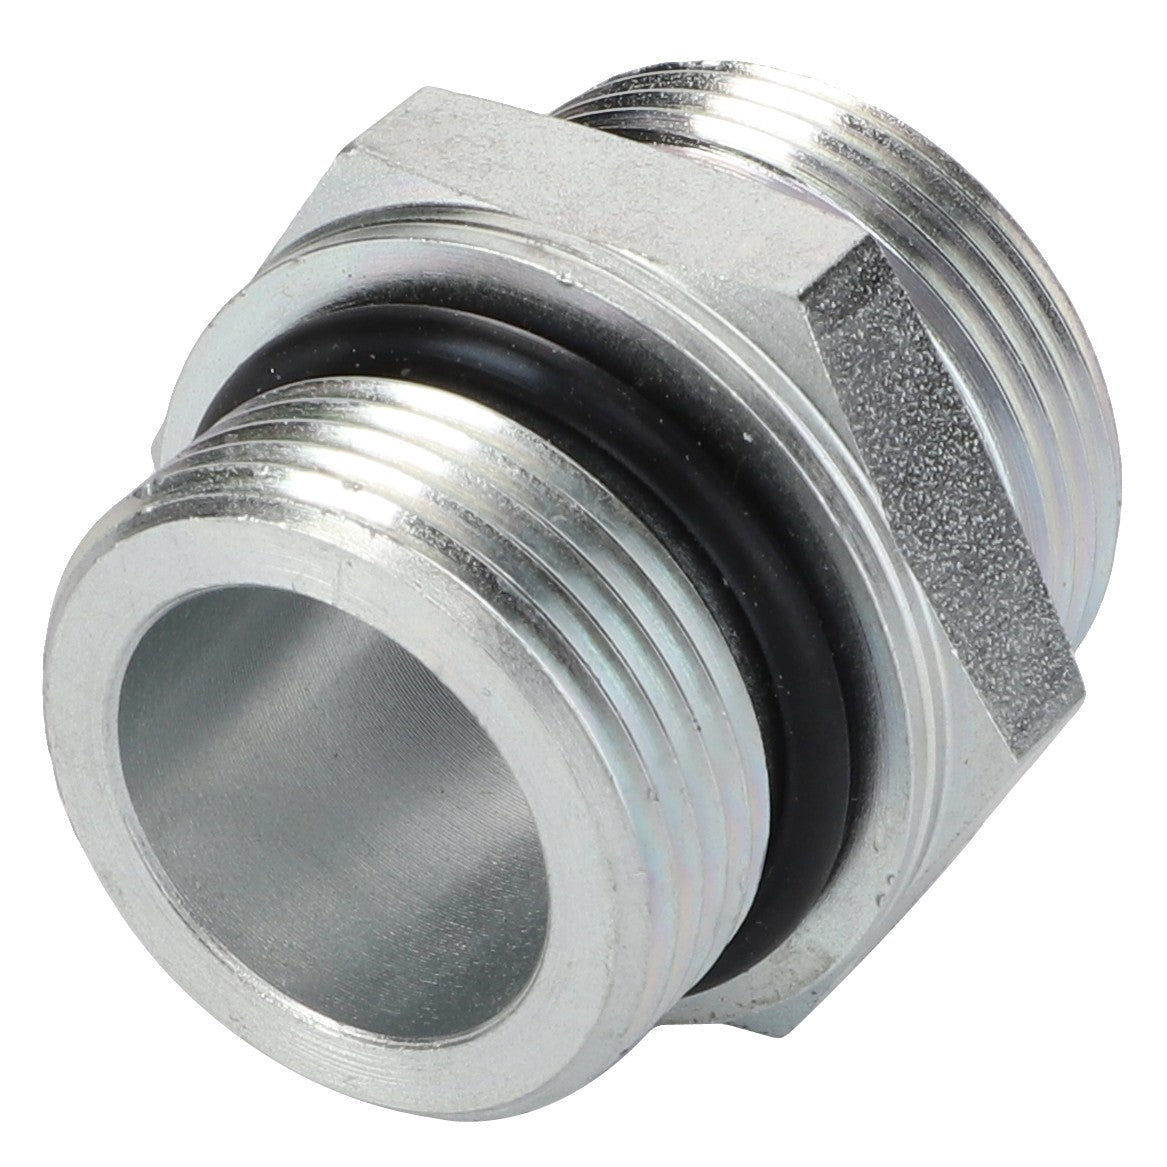 AGCO | Connector Fitting - Acw1631420 - Farming Parts